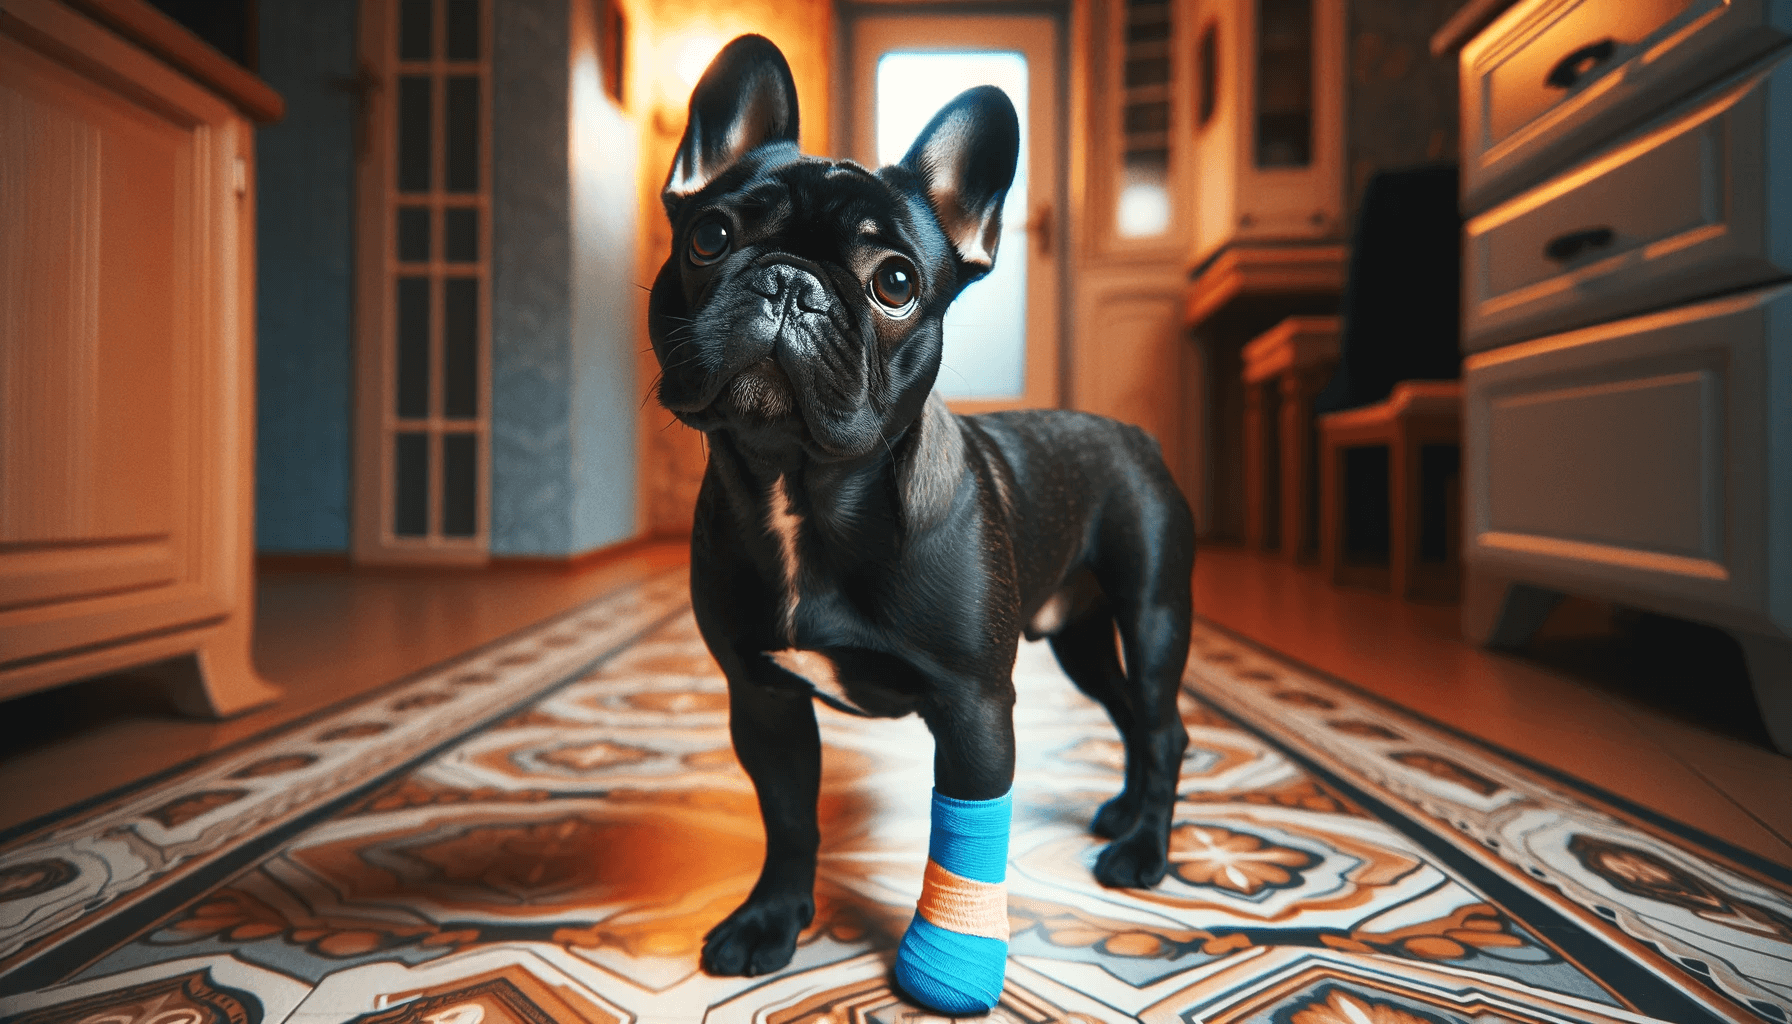 Black French Bulldog with One Bandaged Front Paw Stands on a Patterned Floor Inside a House, Looking Up with a Curious and Attentive Expression